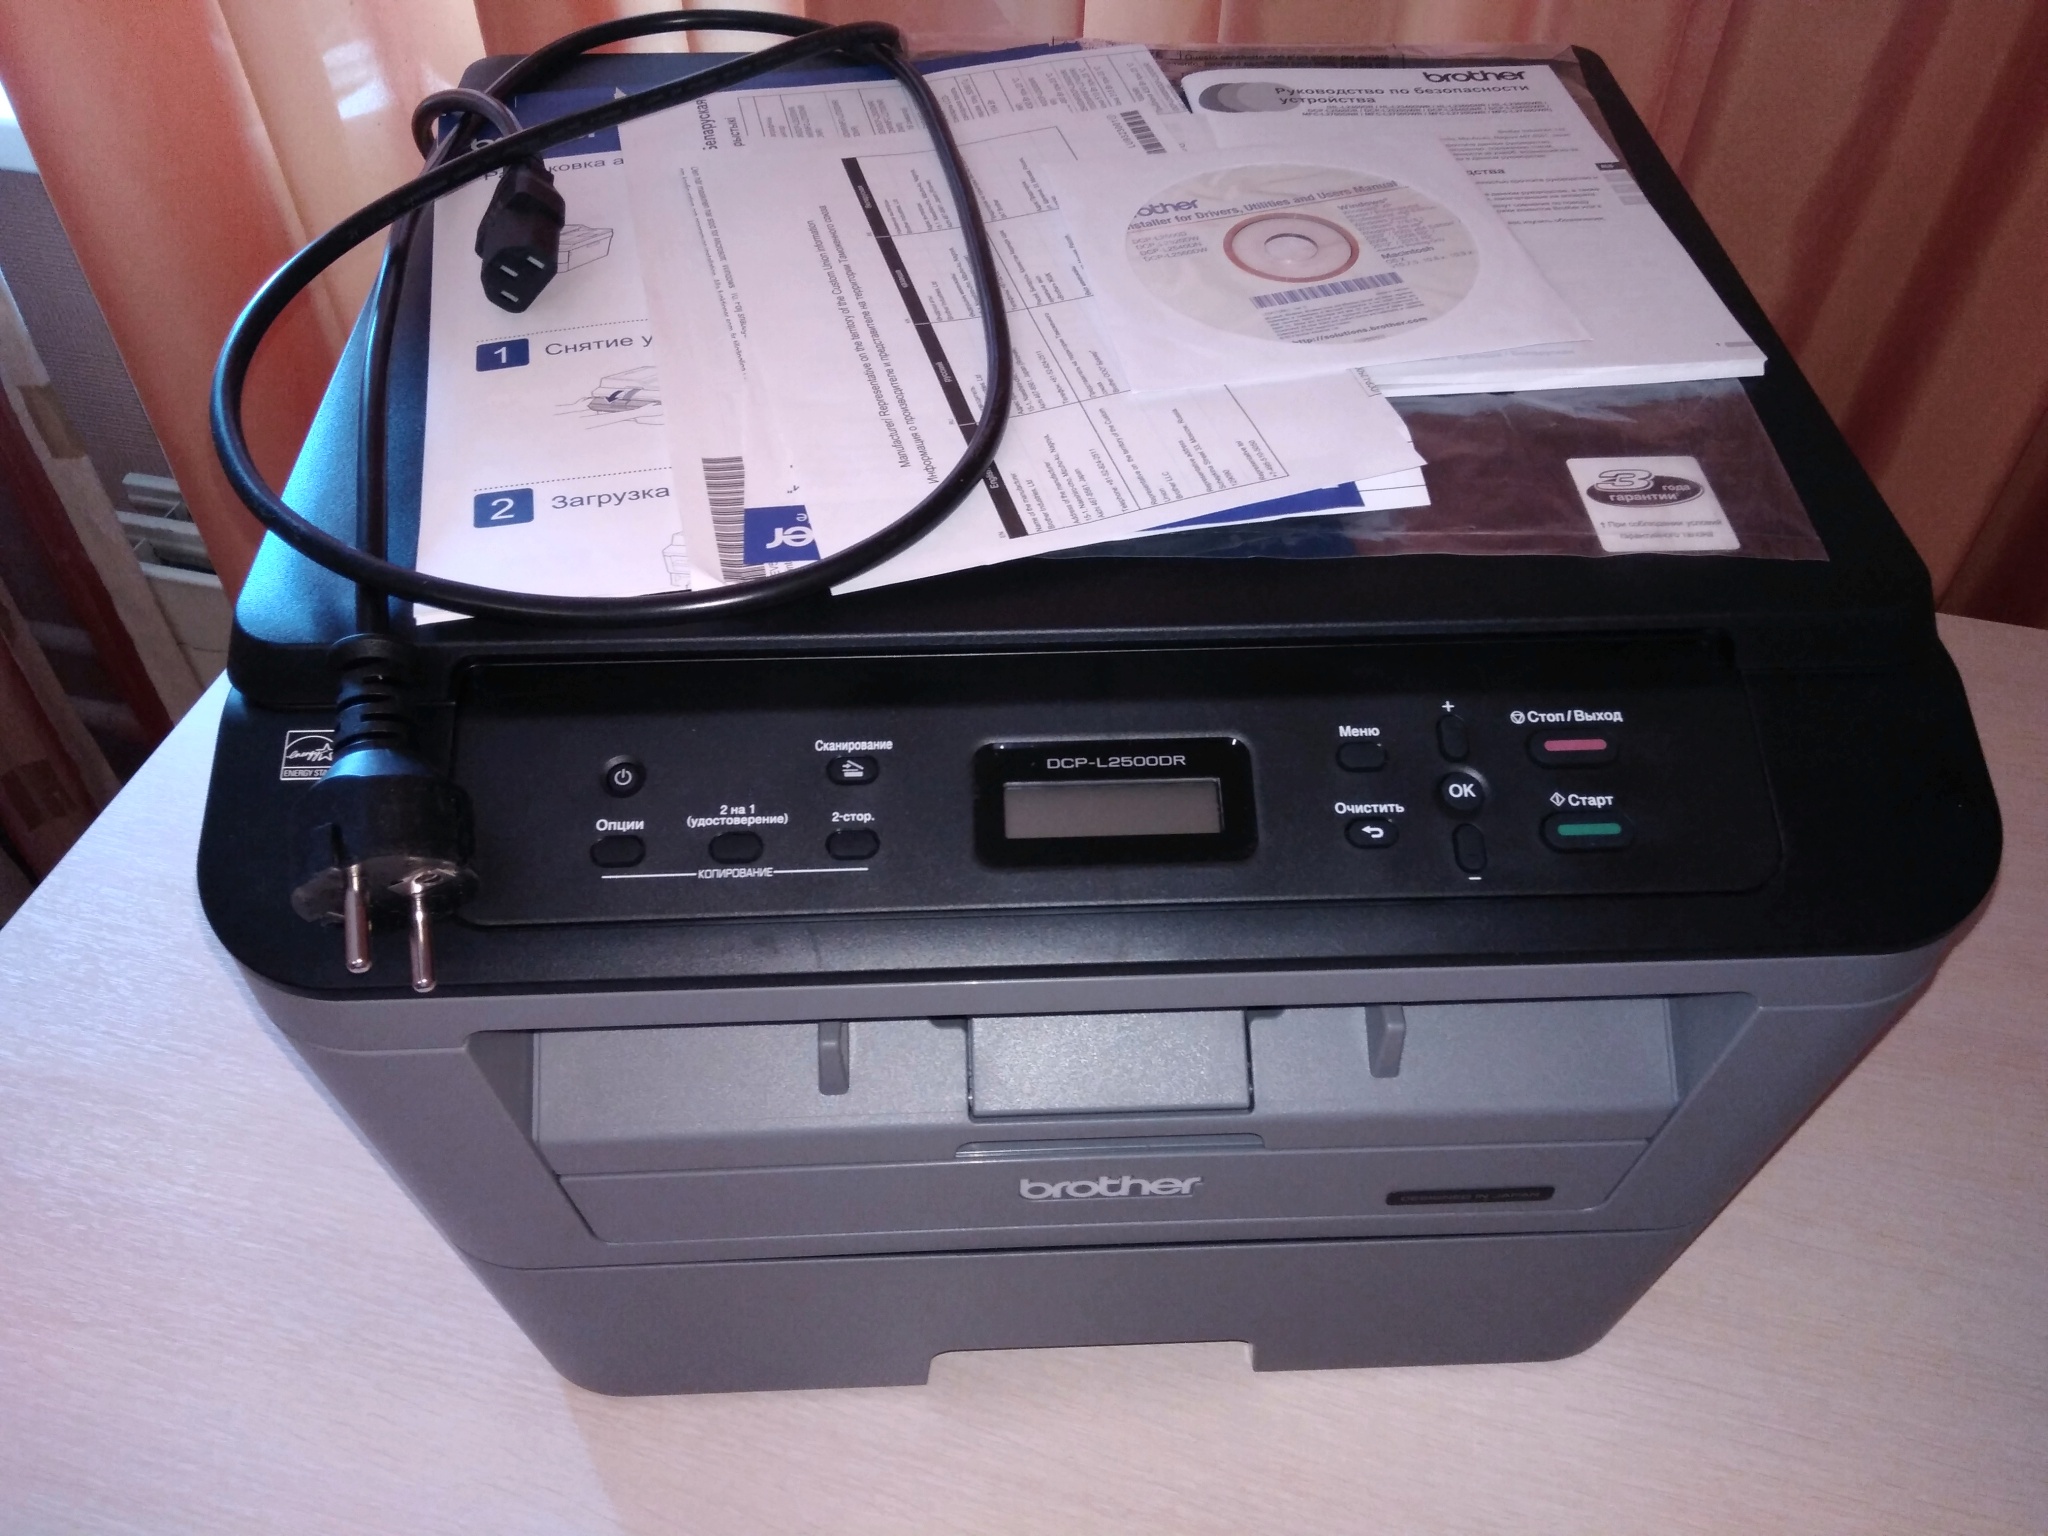 Brother l2500. Принтер brother DCP l2500dr. Brother DCP-l2500dr. Принтер бротхер DCP-l2500dr. Brother DCP-1602r.